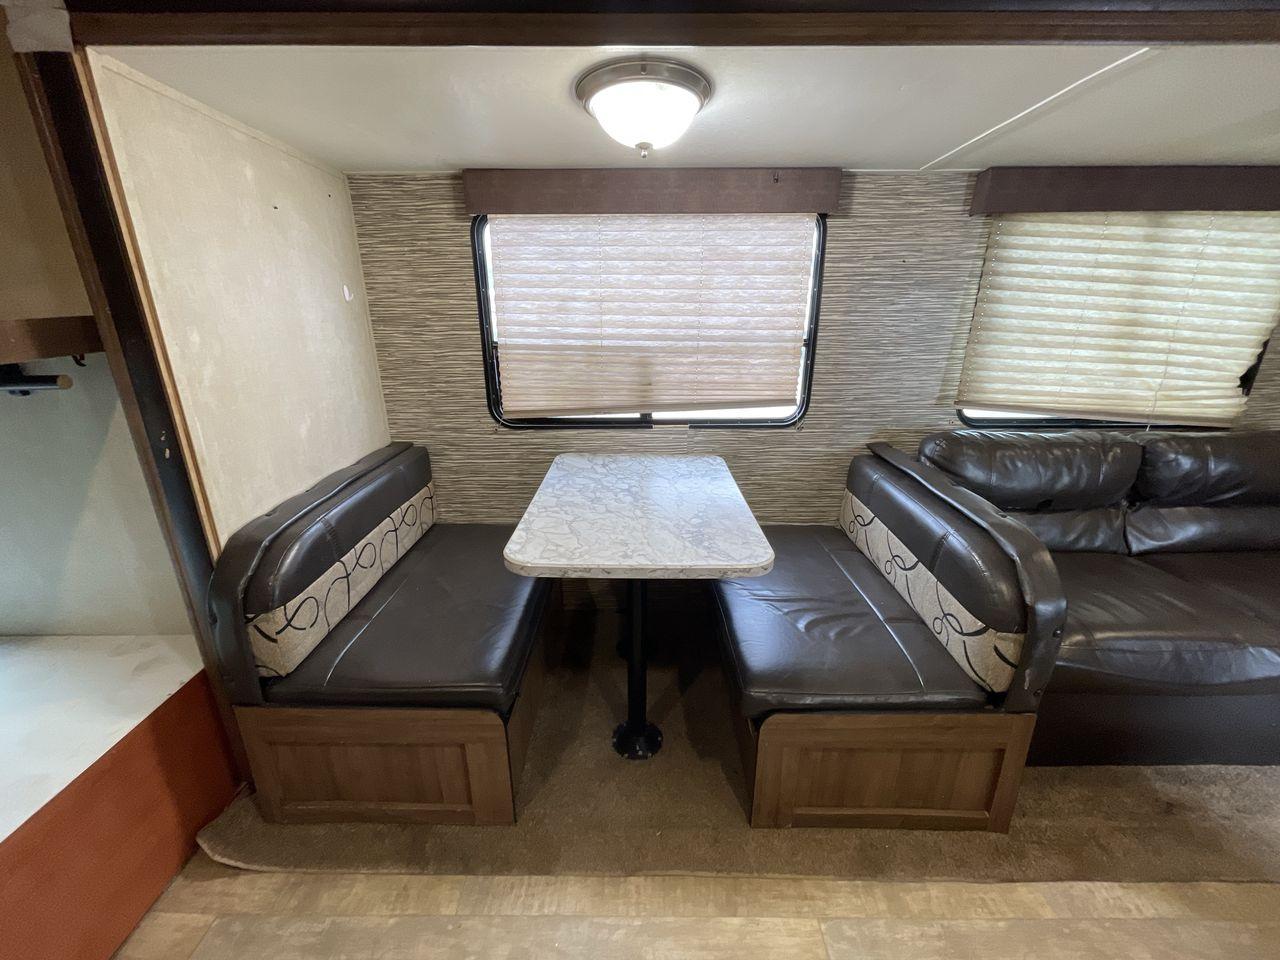 2019 WHITE GULF STREAM CONQUEST 268BH (1NL1G3026K1) , Length: 29.5 ft. | Dry Weight: 5,220 lbs. | Slides: 1 transmission, located at 4319 N Main St, Cleburne, TX, 76033, (817) 678-5133, 32.385960, -97.391212 - Lavish in a cozy trailer when you are out for a camping trip with the whole family in this 2019 Gulf Stream Conquest 268BH Travel Trailer. The measurements of this trailer are 29.6 ft in length, 8 ft in width, 11.1 ft in height, and 6.8 ft in interior height. It has a dry weight of 5,177 lbs with a - Photo #14